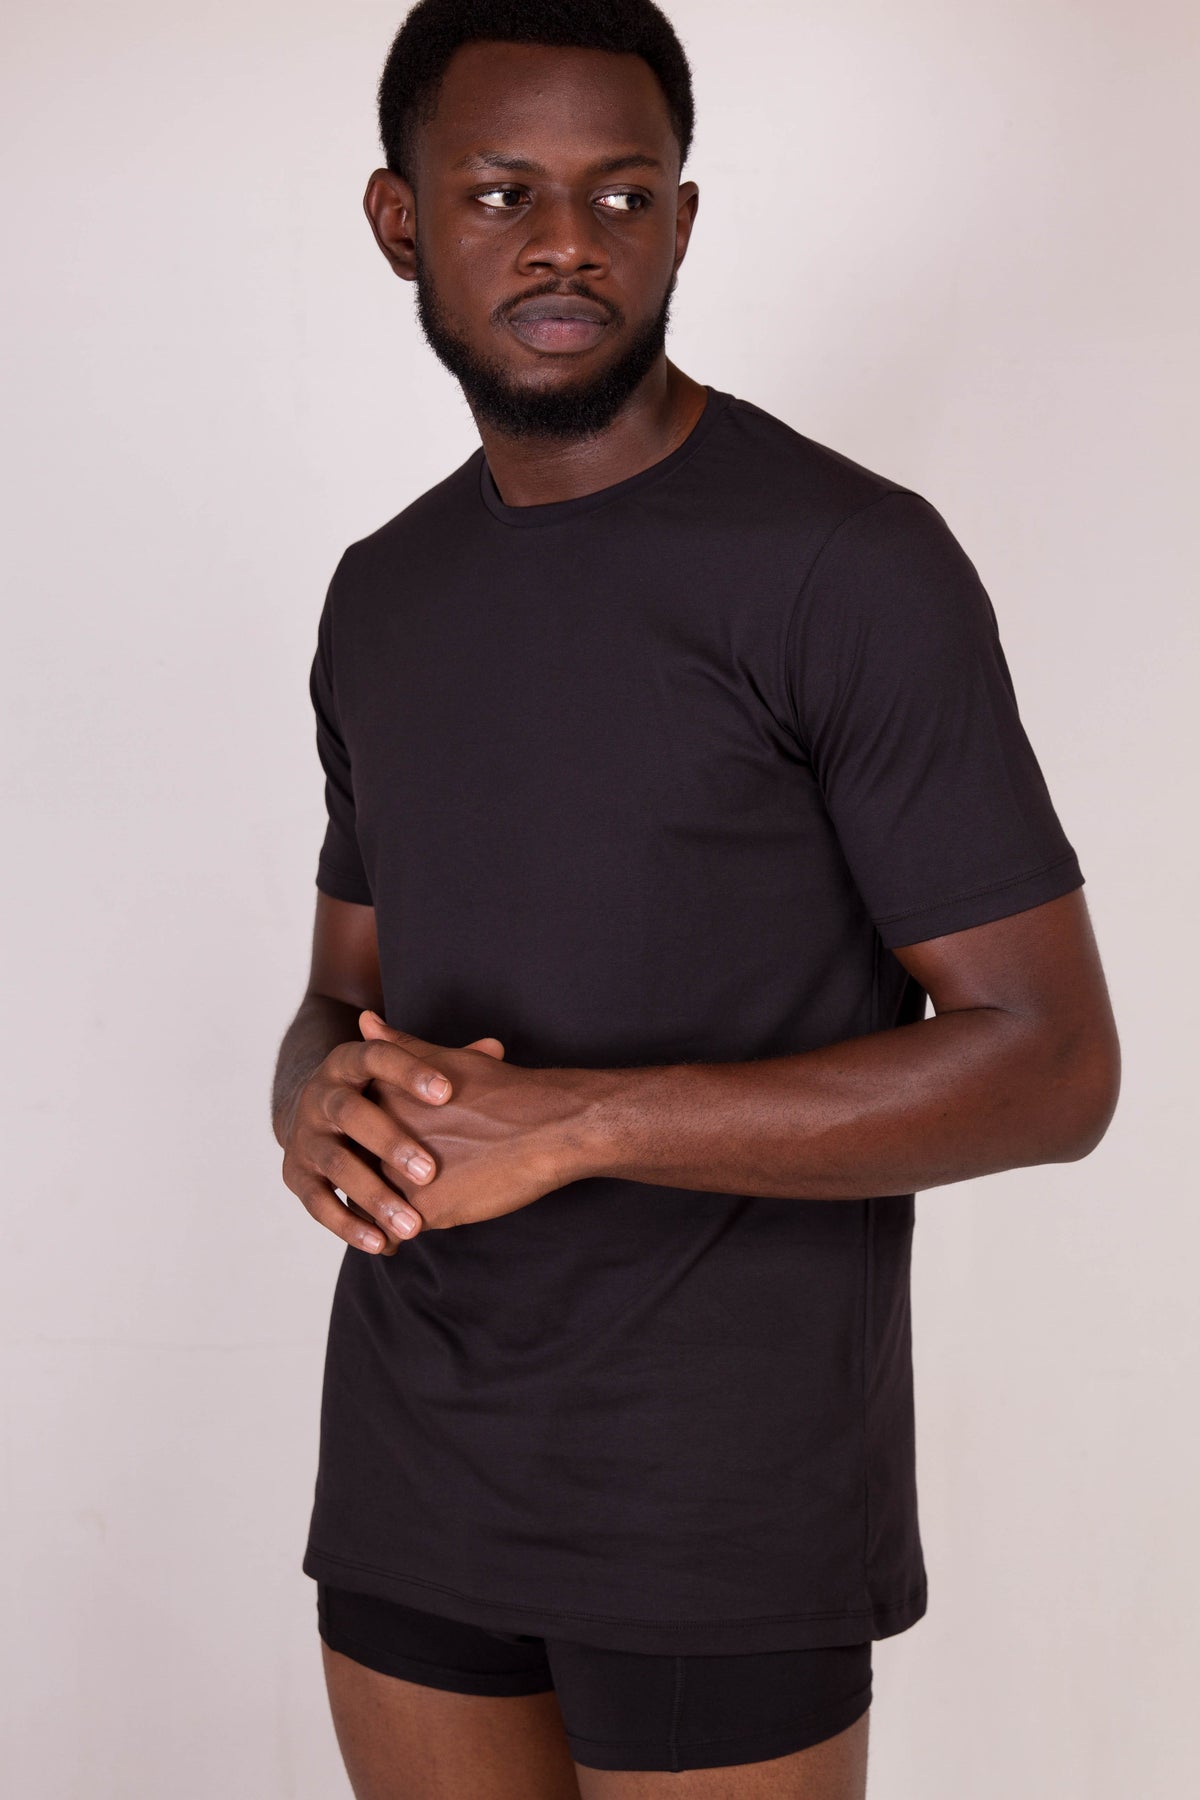 a man in a black shirt is posing for a picture